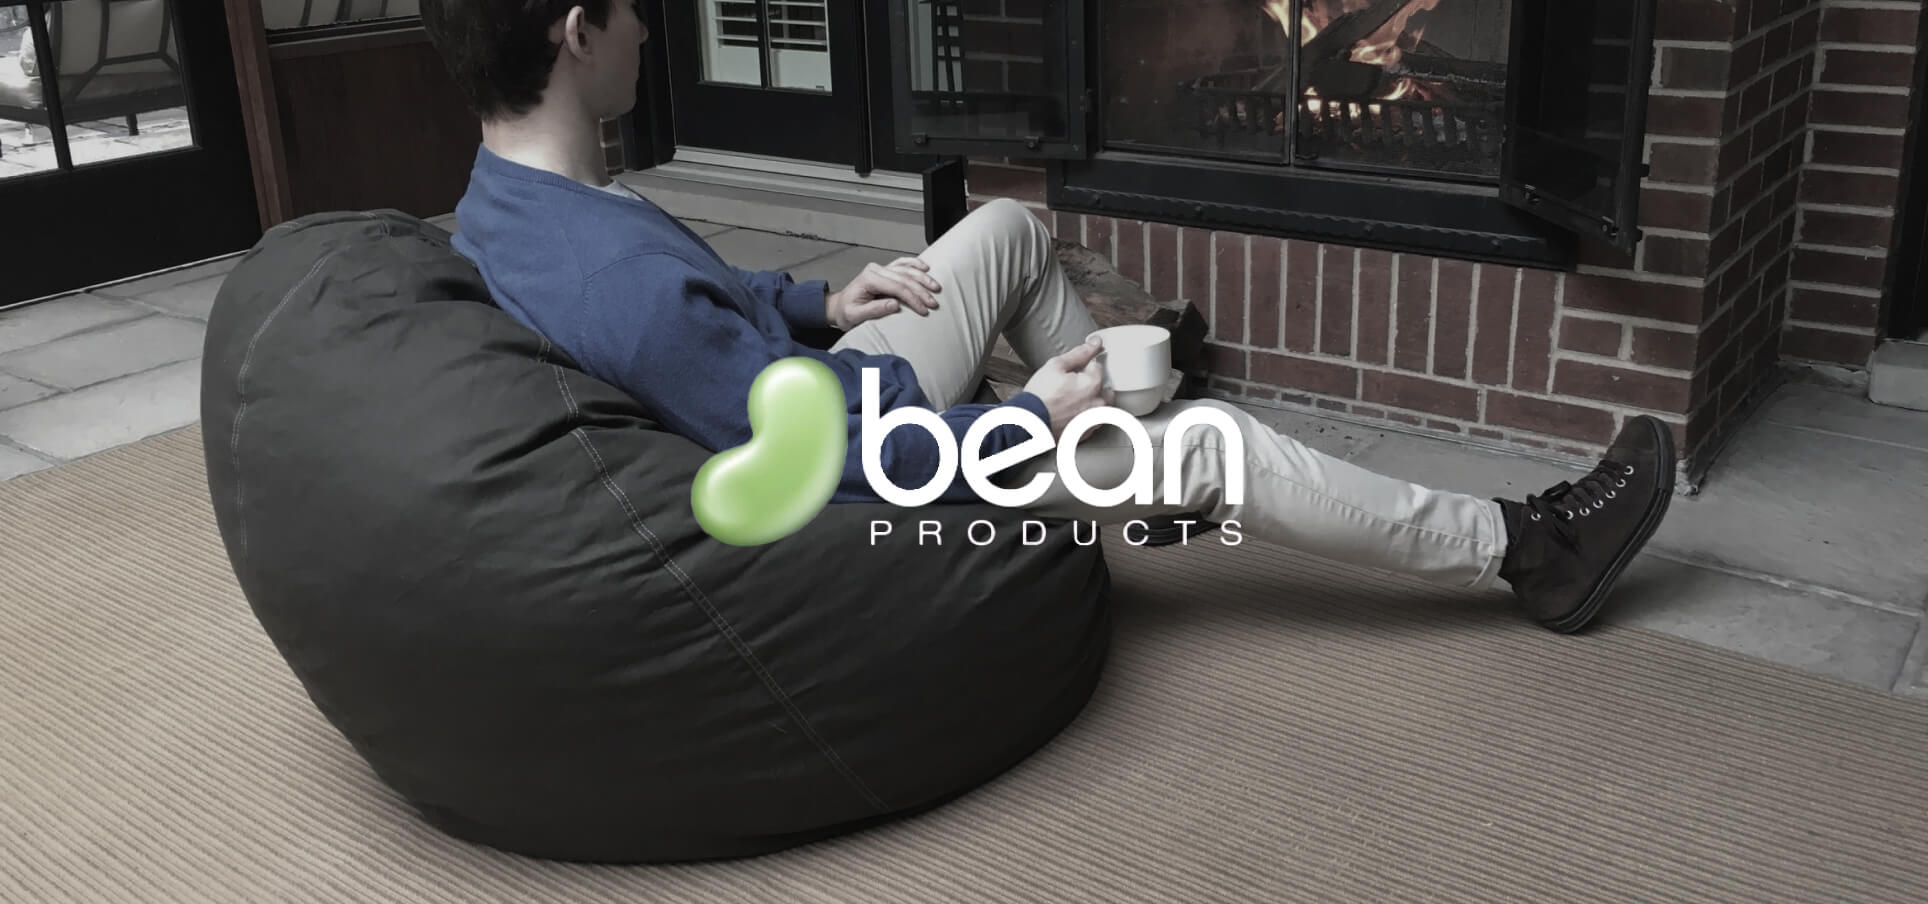 Bean Products Inc